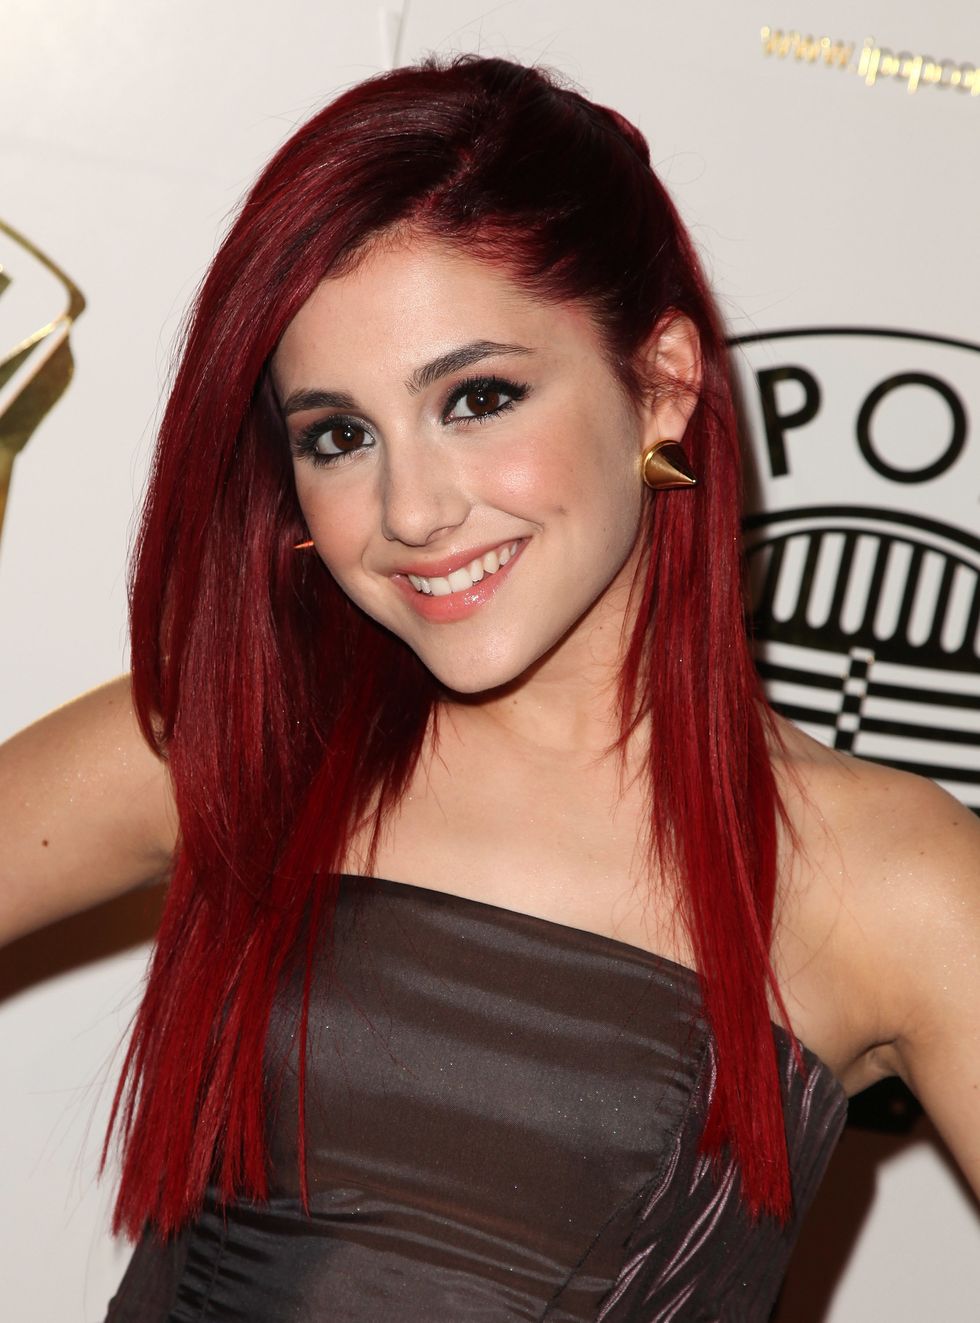 Ariana Grande's recent hairstyle is such a Nickelodeon throwback